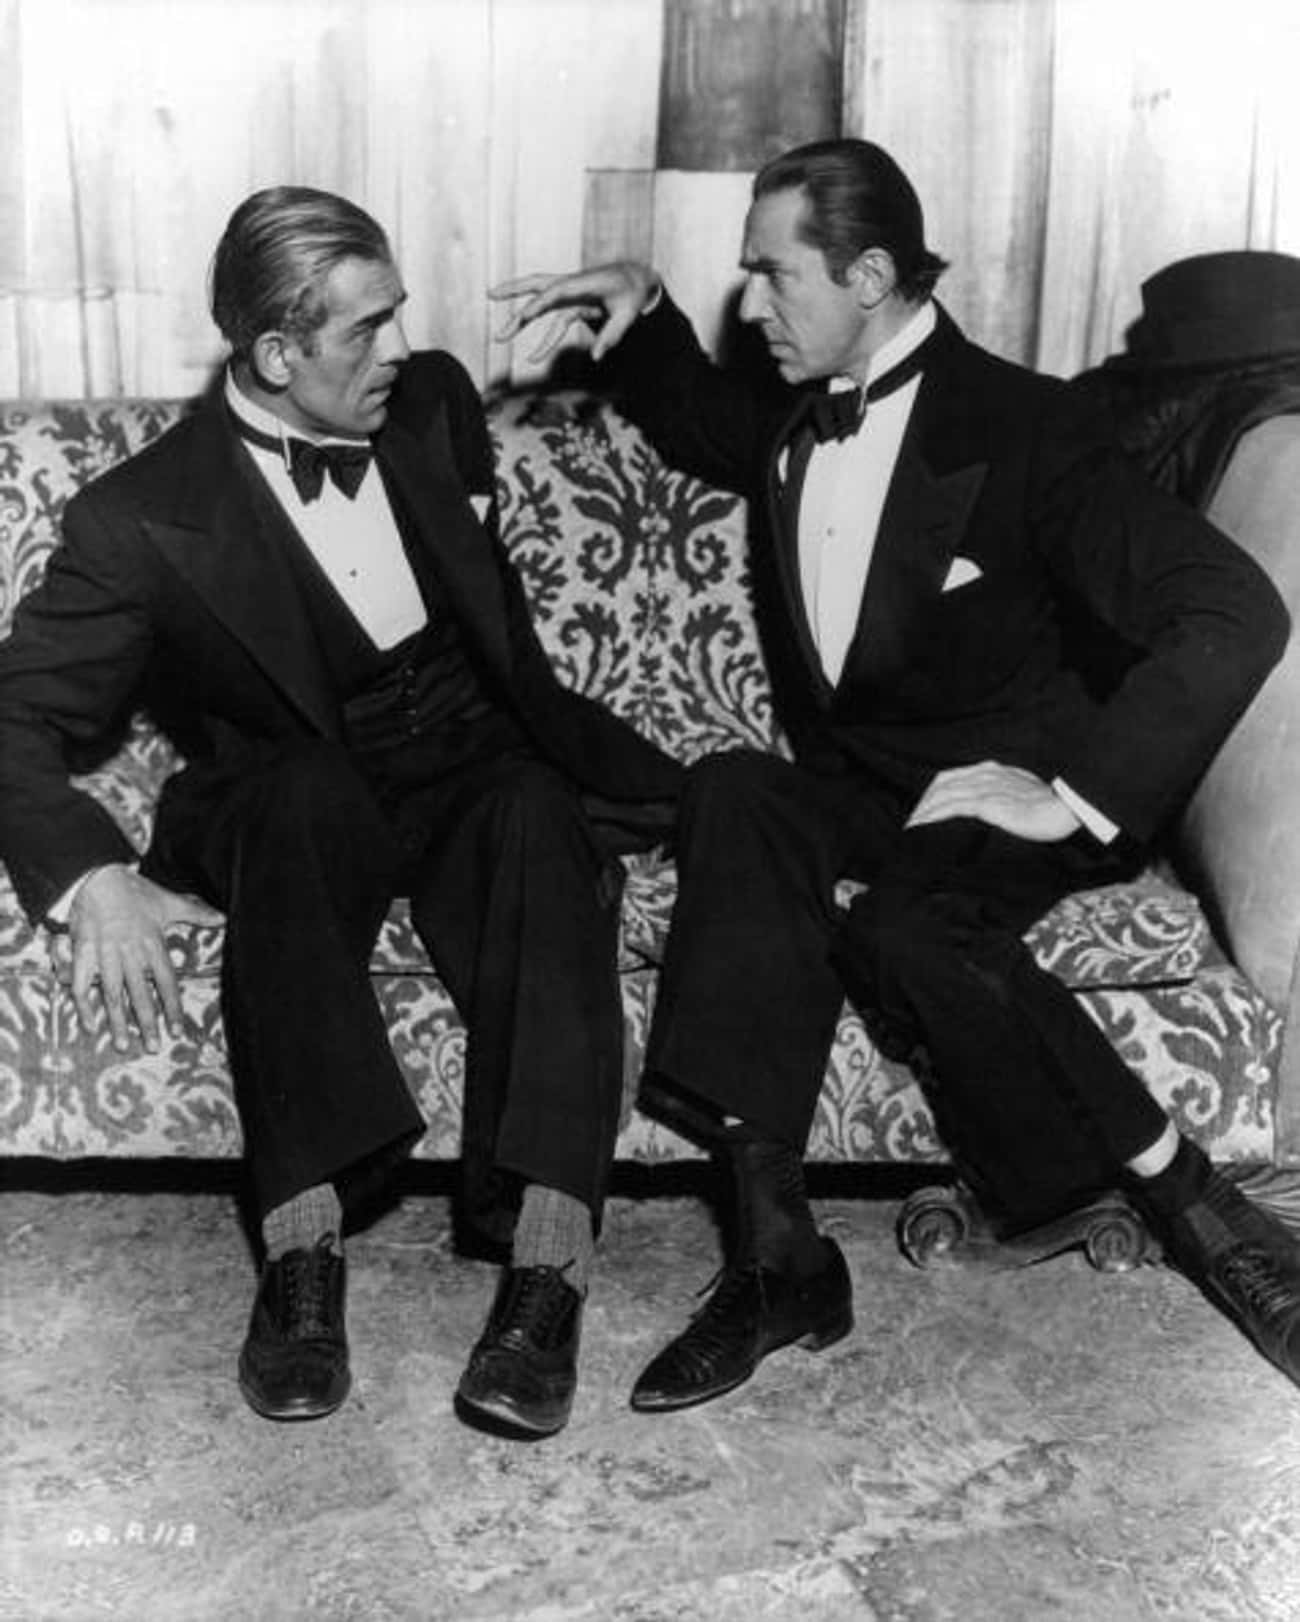 He Had A Hot And Cold Relationship With Boris Karloff